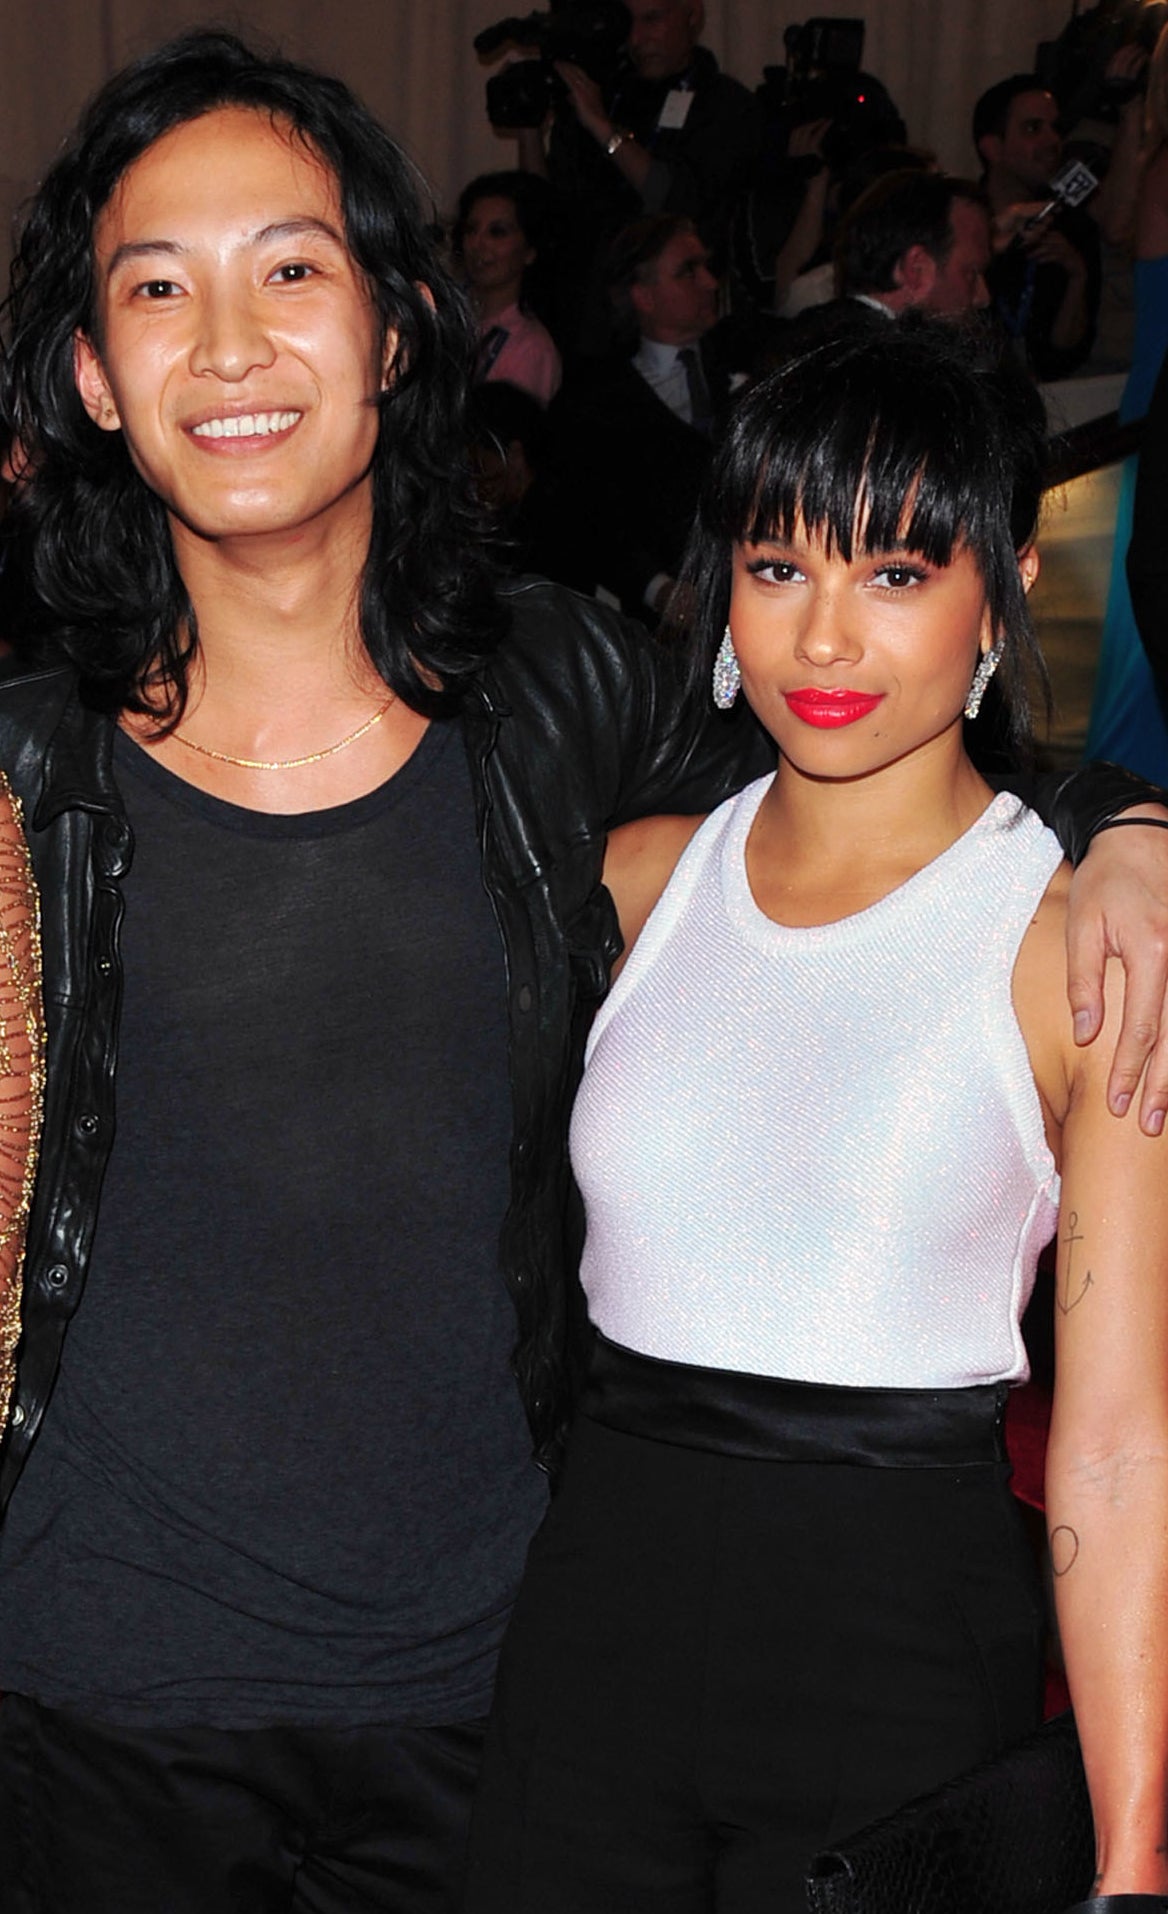 Alexander Wang and Zoe posing for a photo backstage